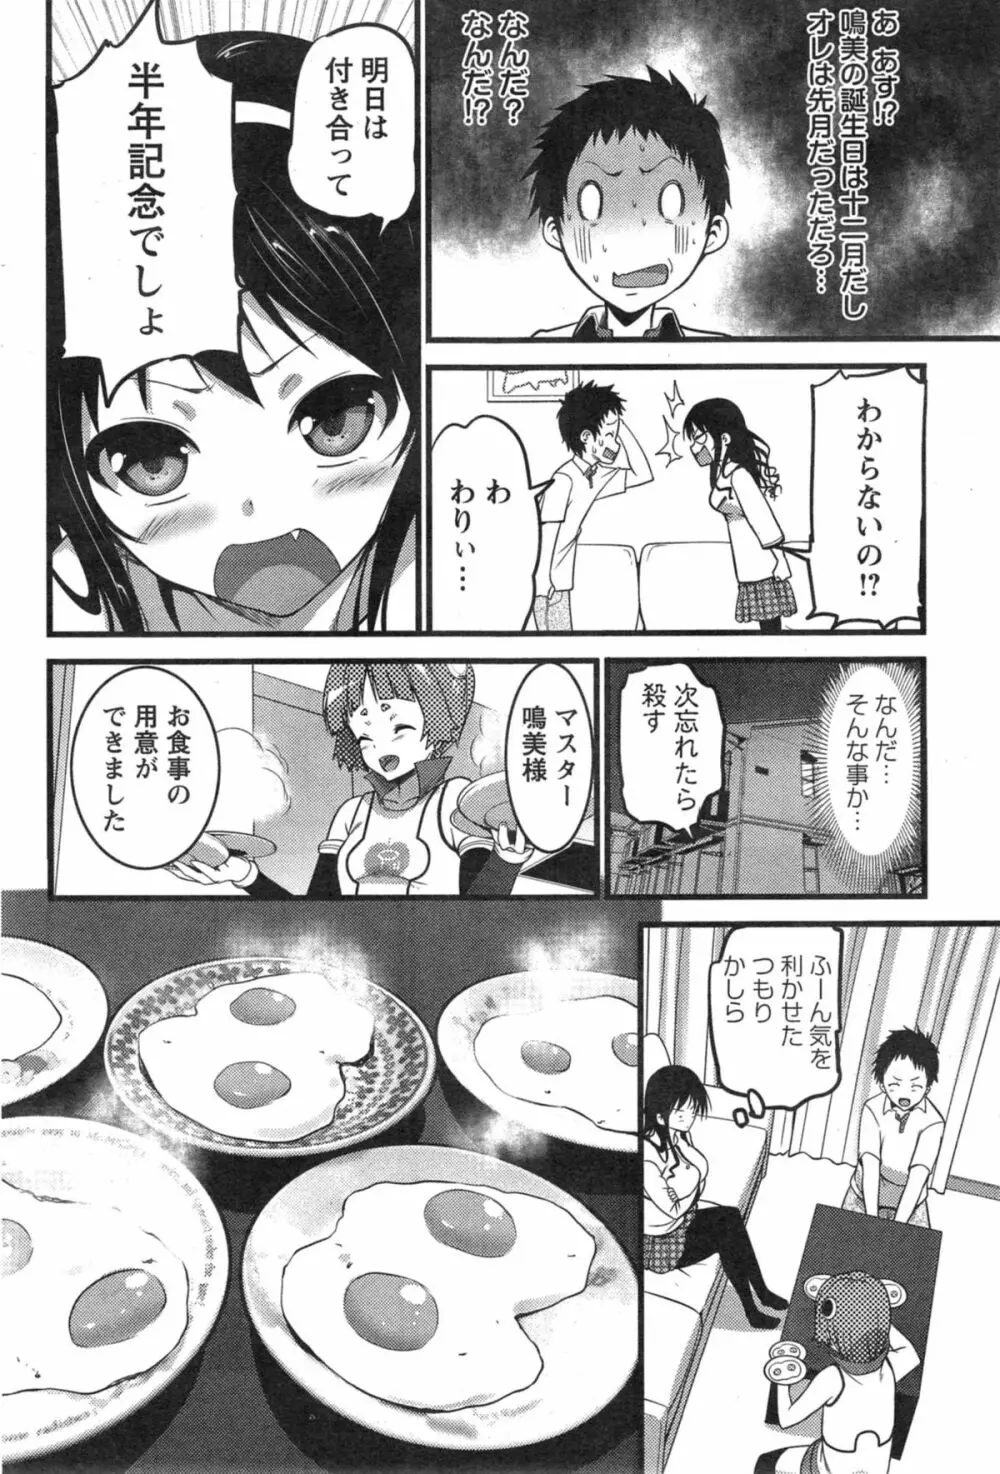 Pear Phone 第1-2章 Page.24